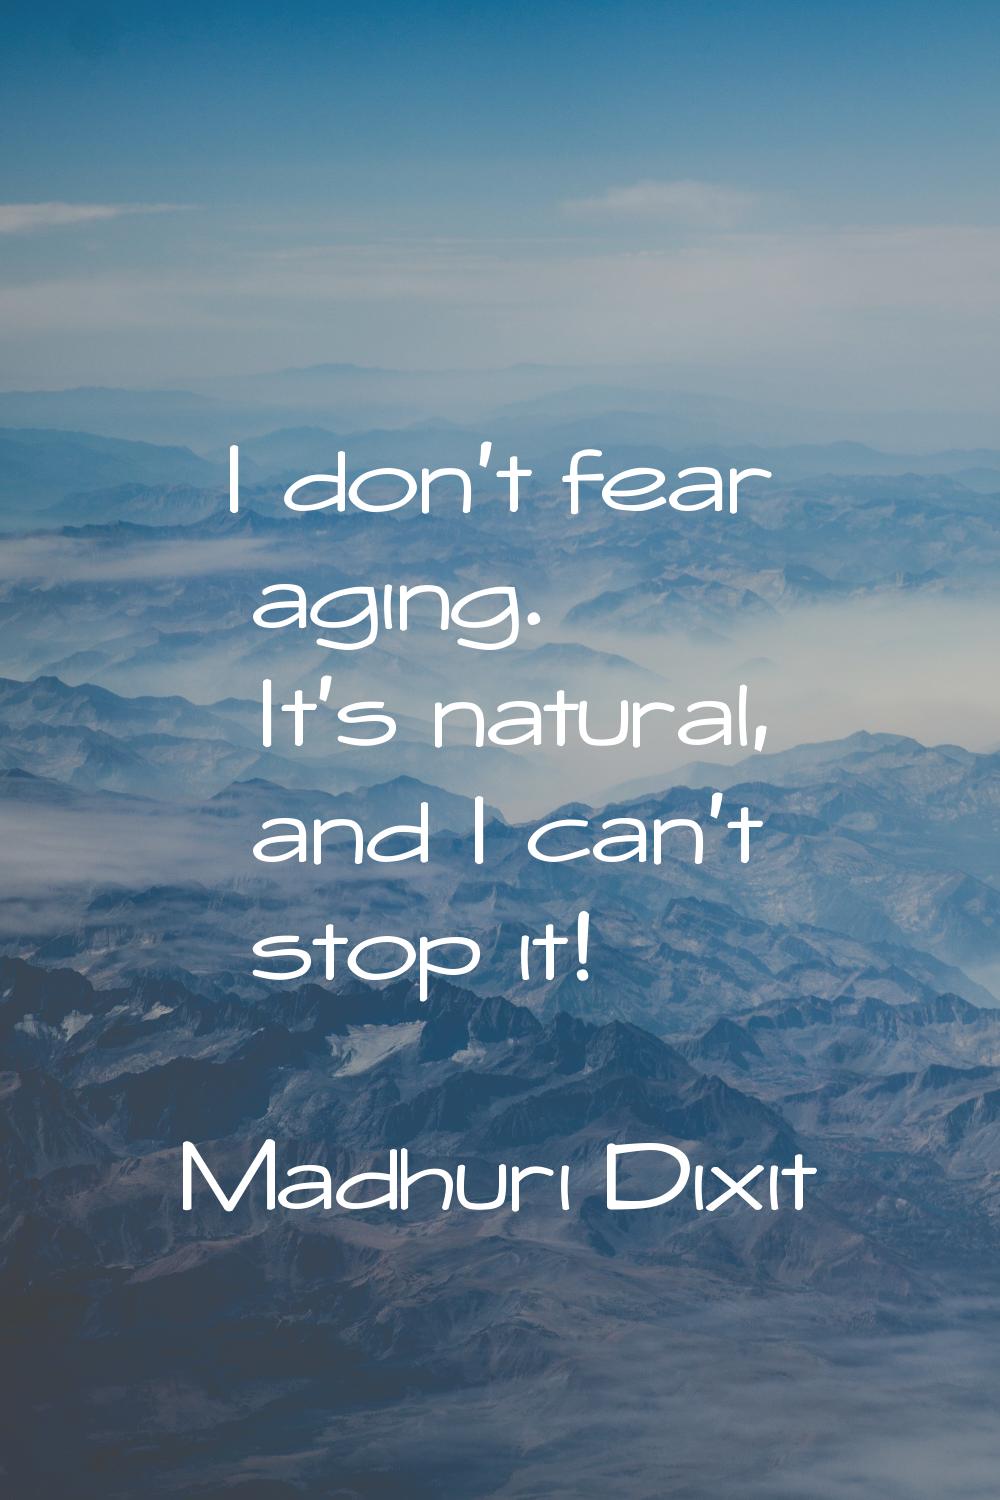 I don't fear aging. It's natural, and I can't stop it!